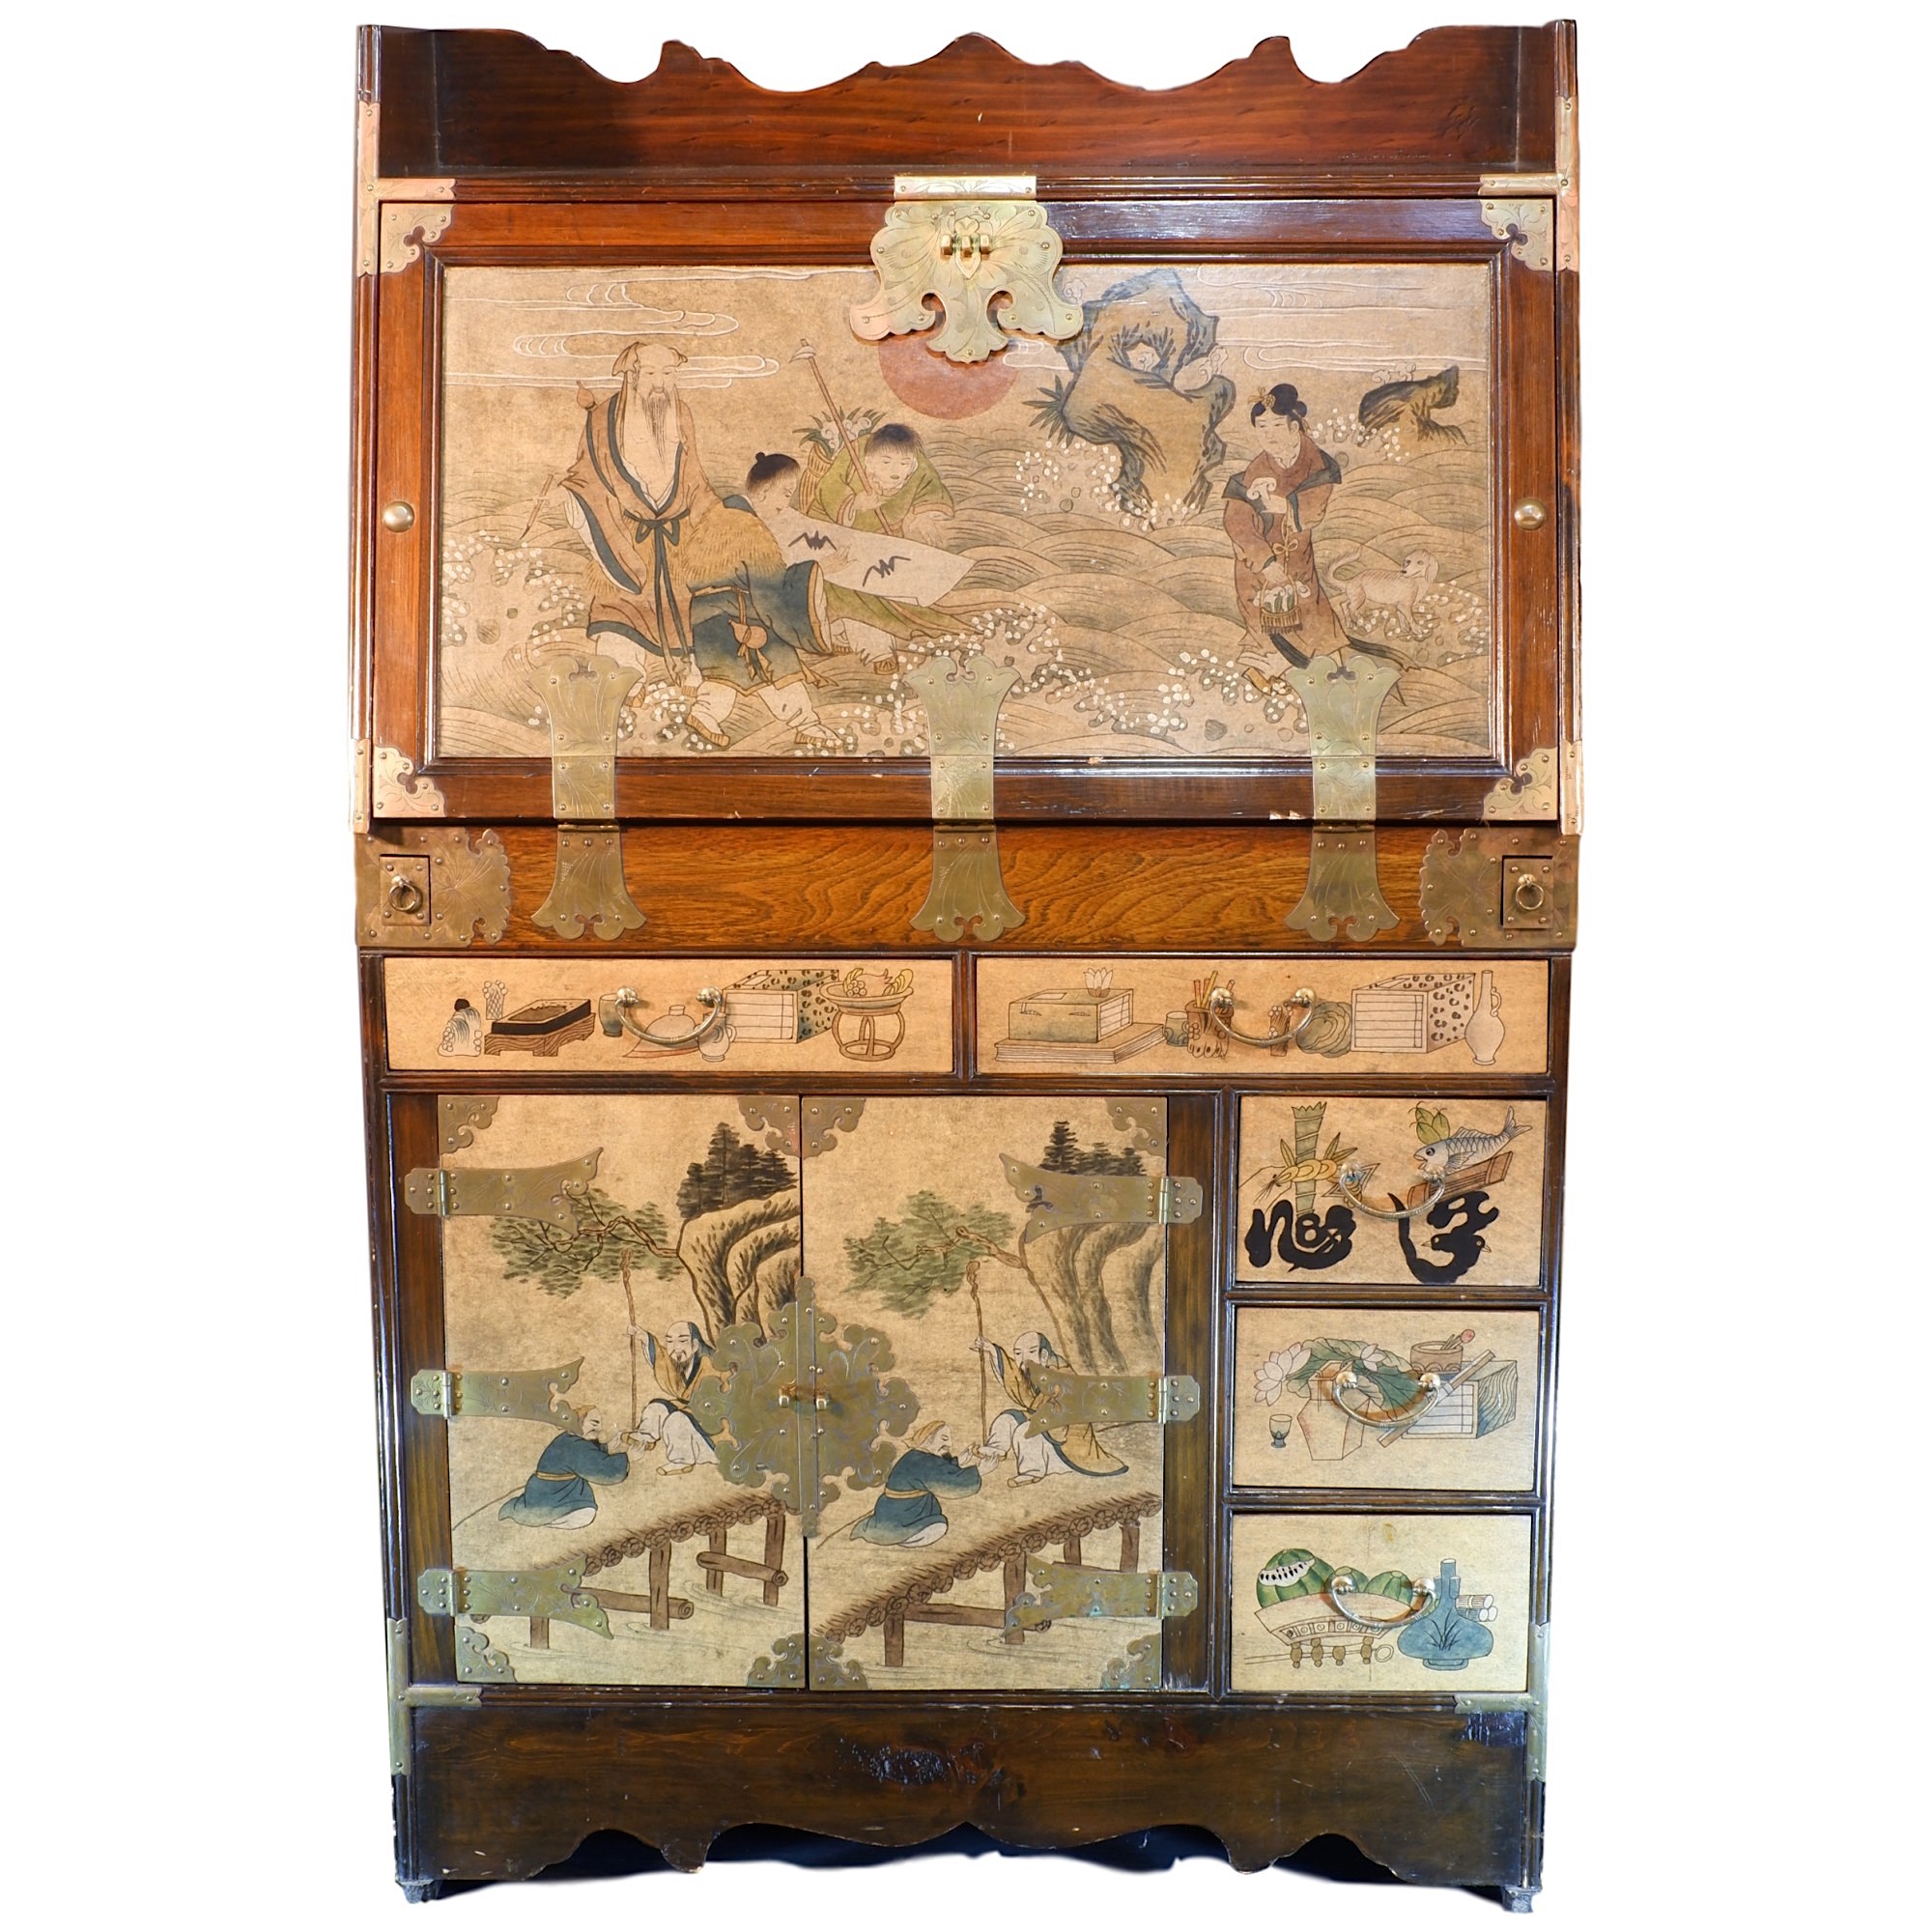 'Korean Brass Bound and Polychrome Lacquer Decorated Bureau'